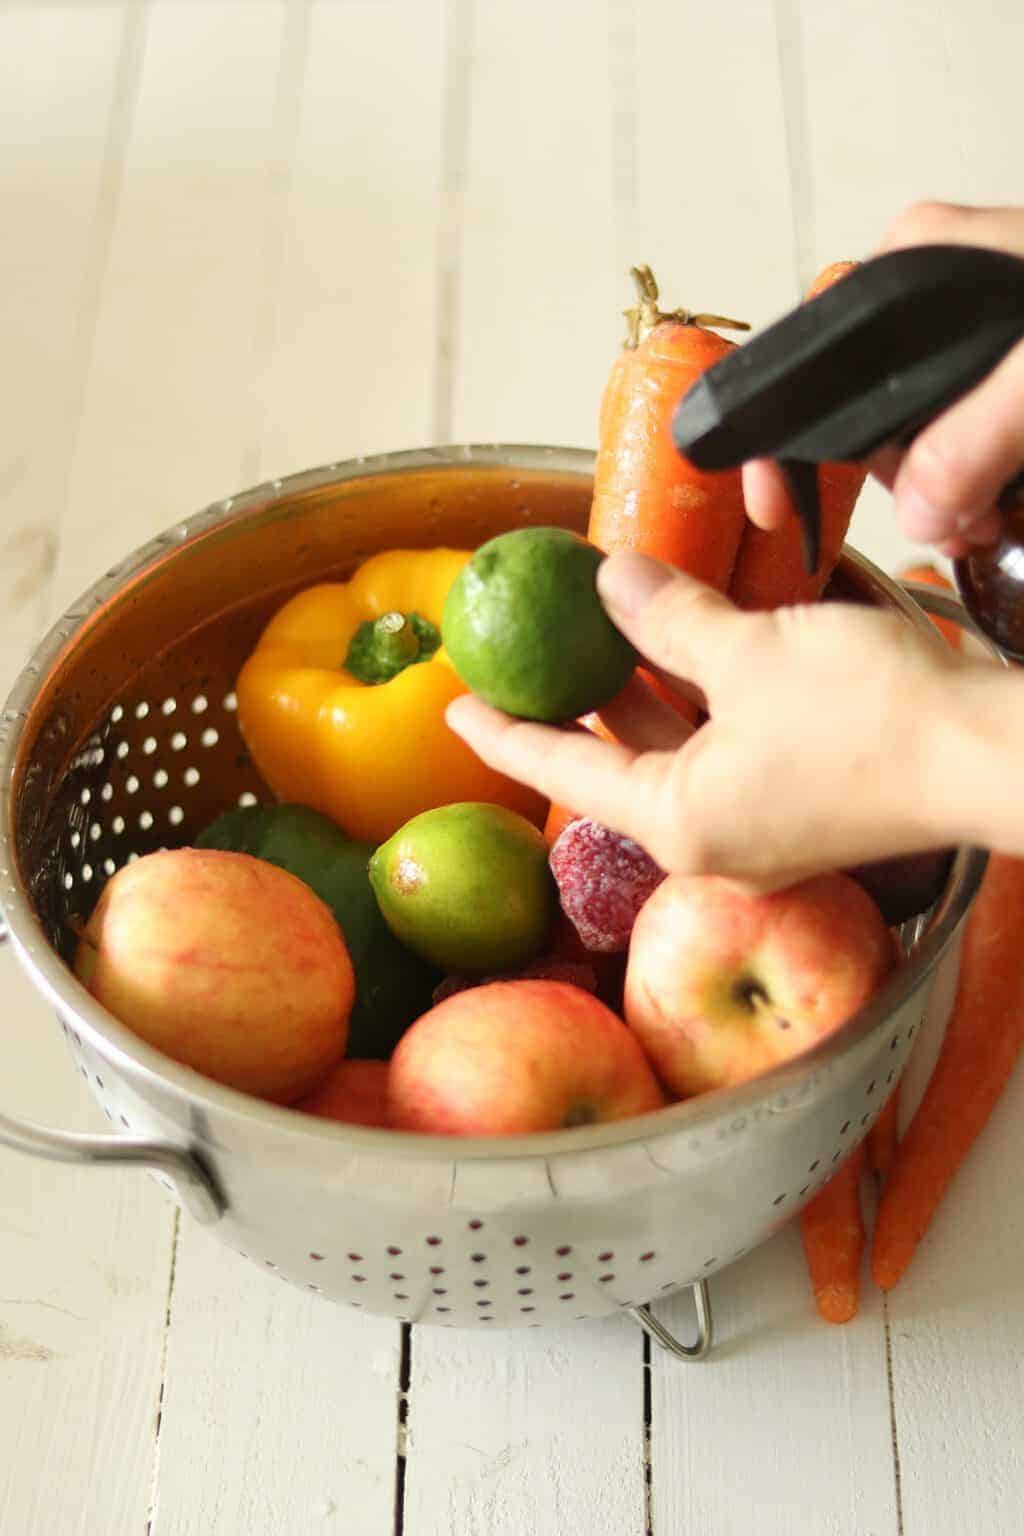 Fruit and vegetables in mettle strainer.